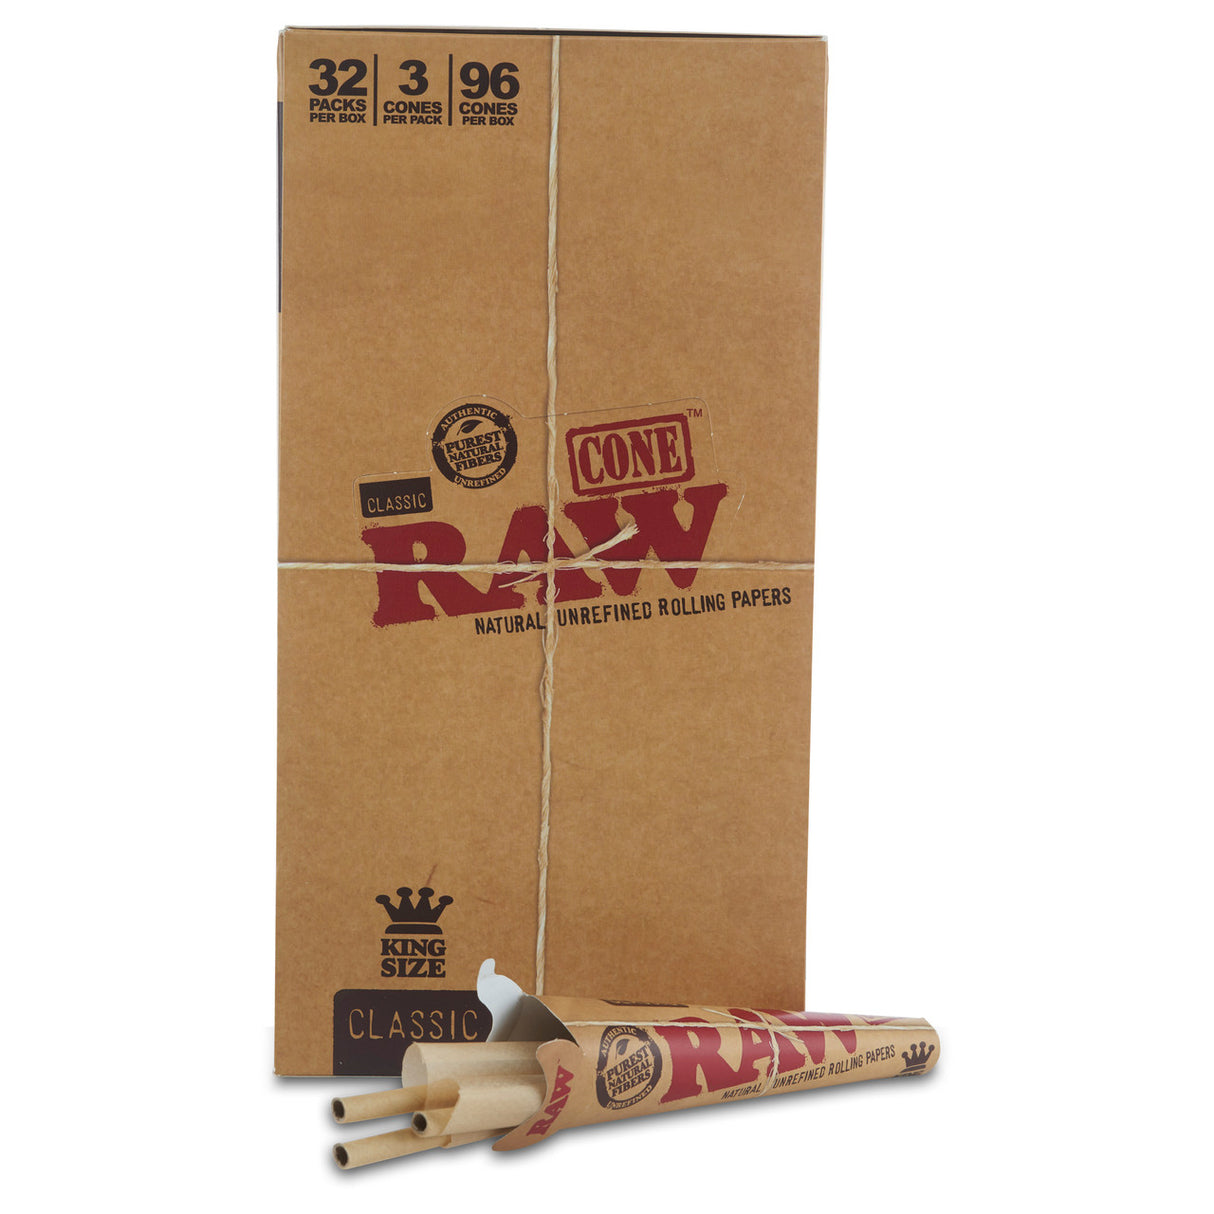 raw classic king size cones